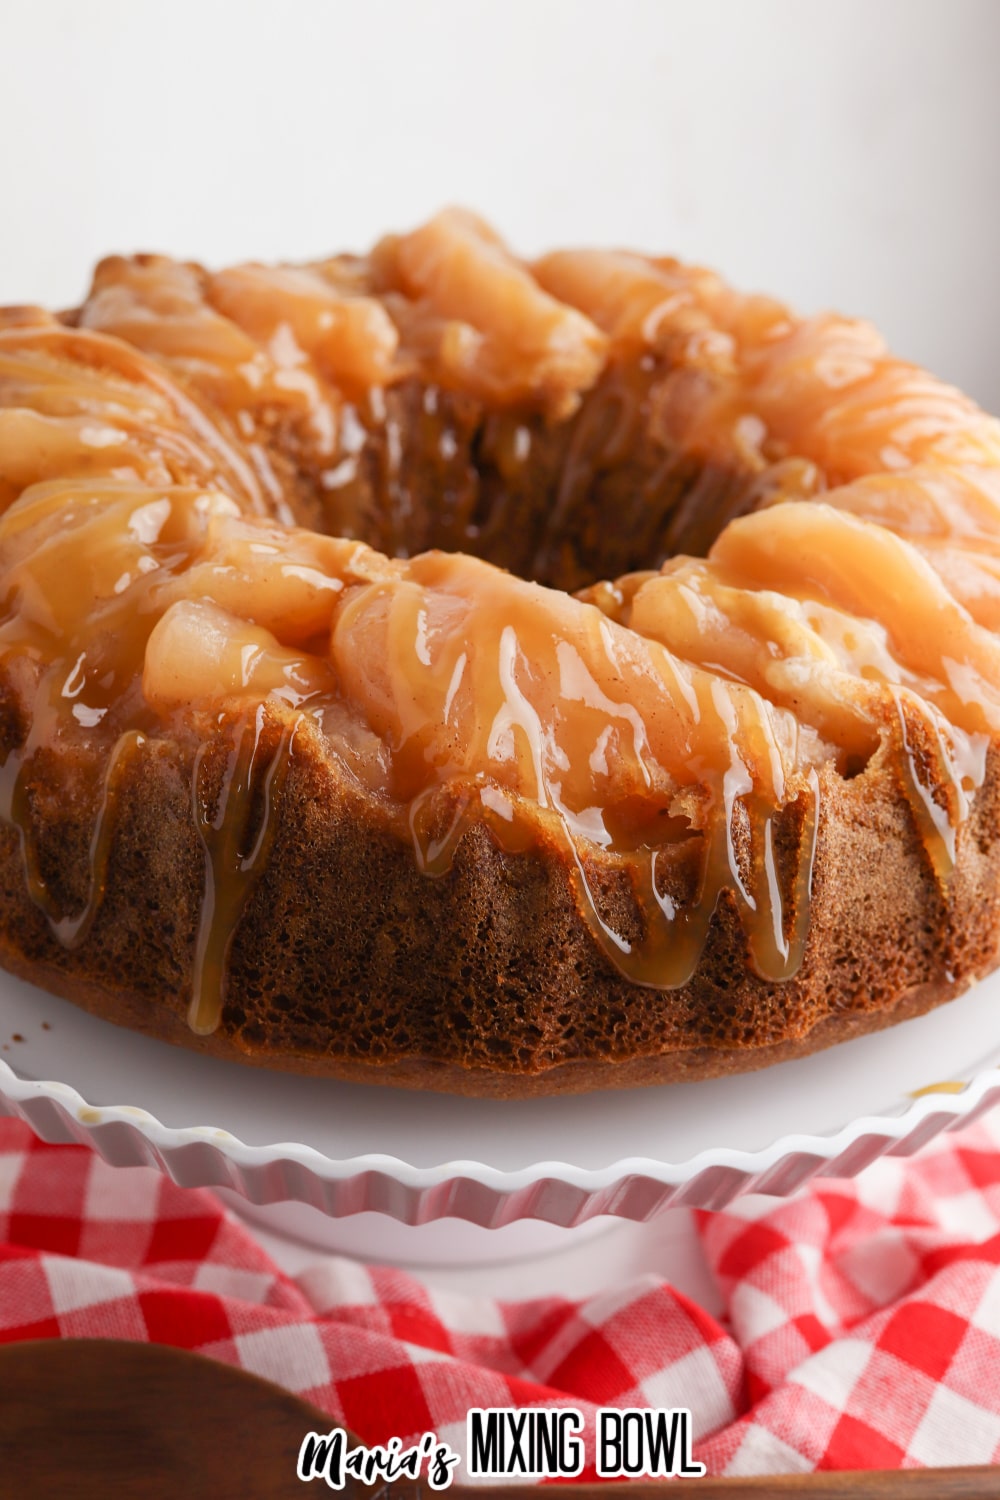 side view of a whole caramel upside down bundt cake on white cake stand